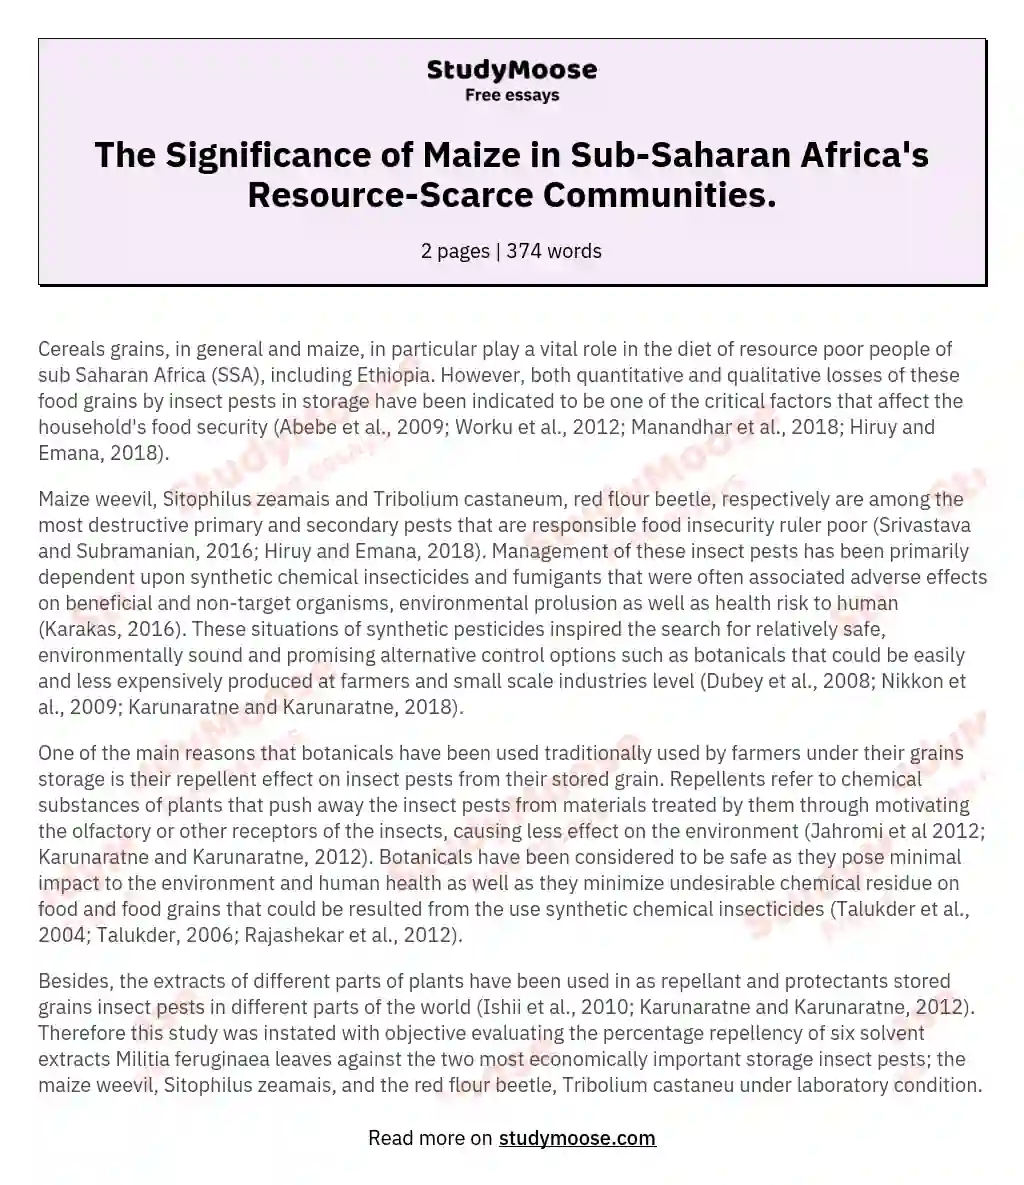 The Significance of Maize in Sub-Saharan Africa's Resource-Scarce Communities. essay